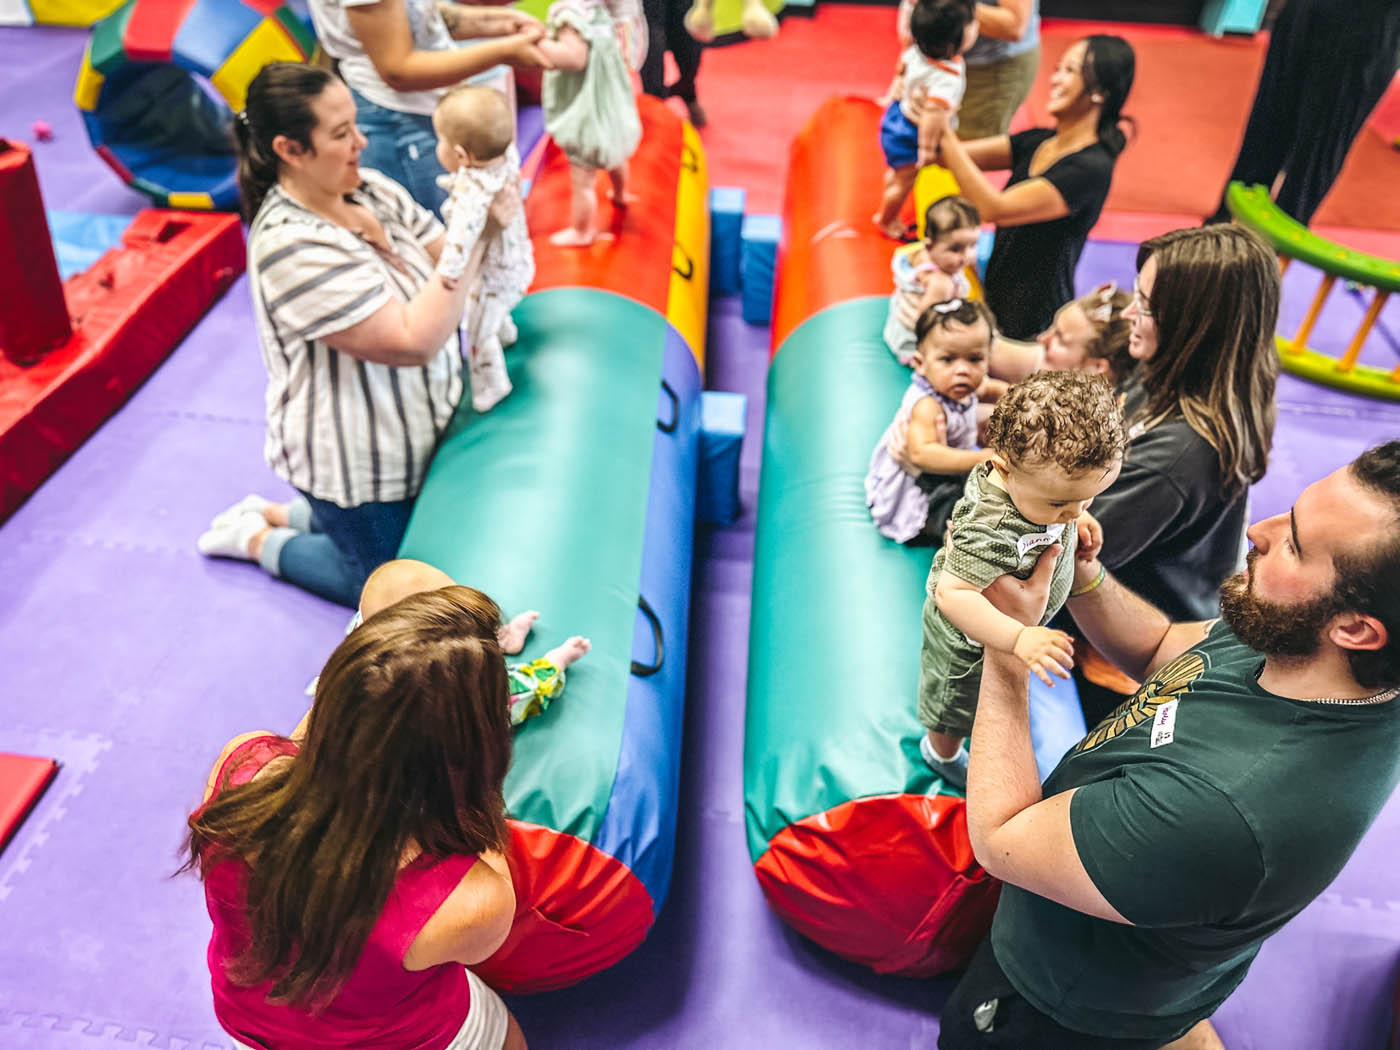 A group of parent and children enjoying Romp n' Roll Wethersfield's gym, review our frequently asked questions at Romp n' Roll Wethersfield.